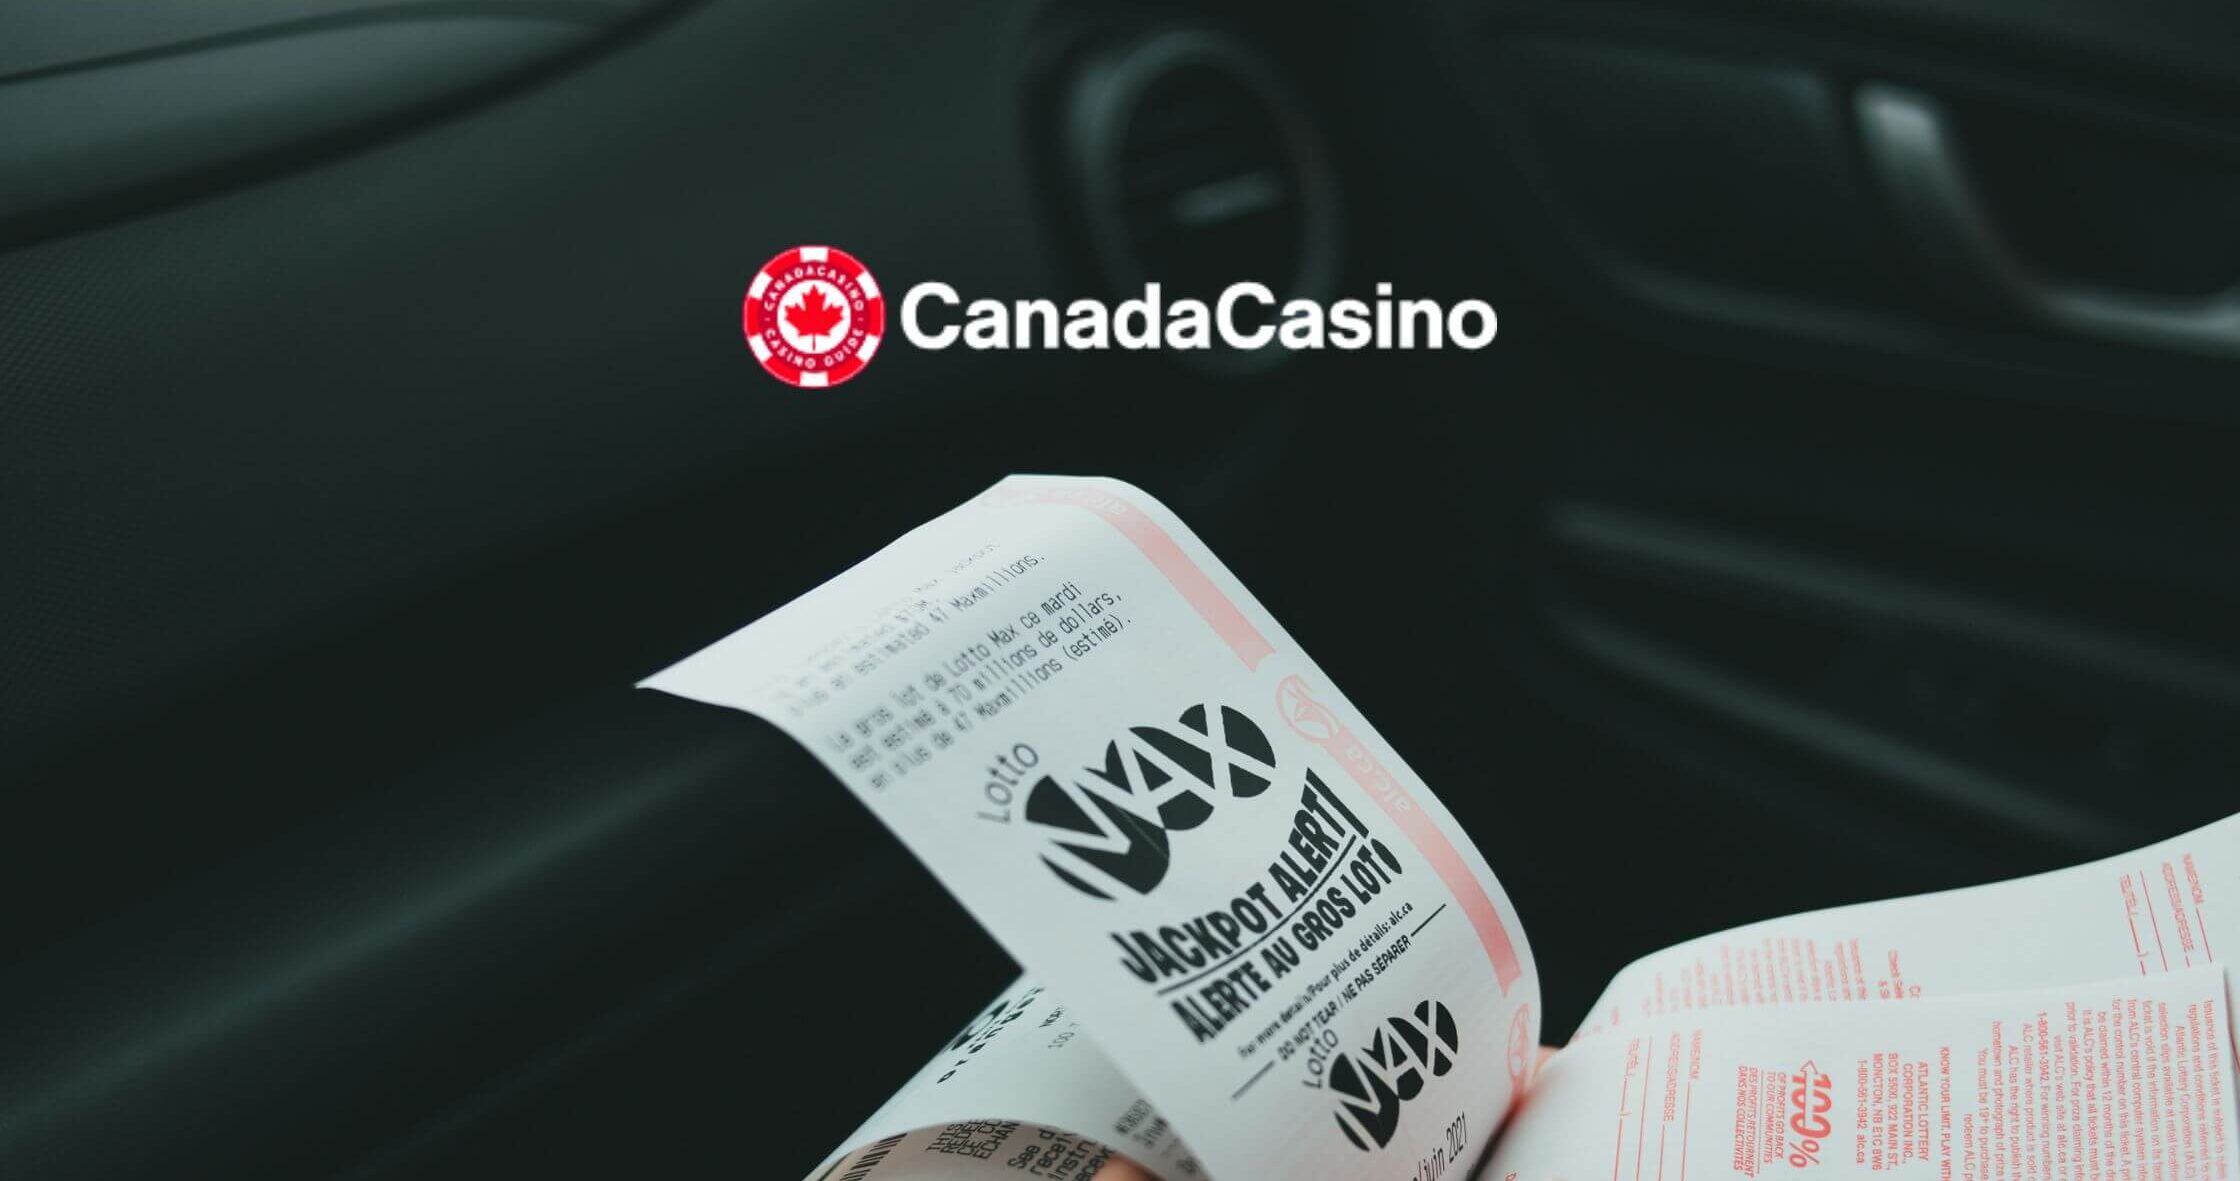 Merged Campaign To Work Against Children’s Access to Lottery Tickets